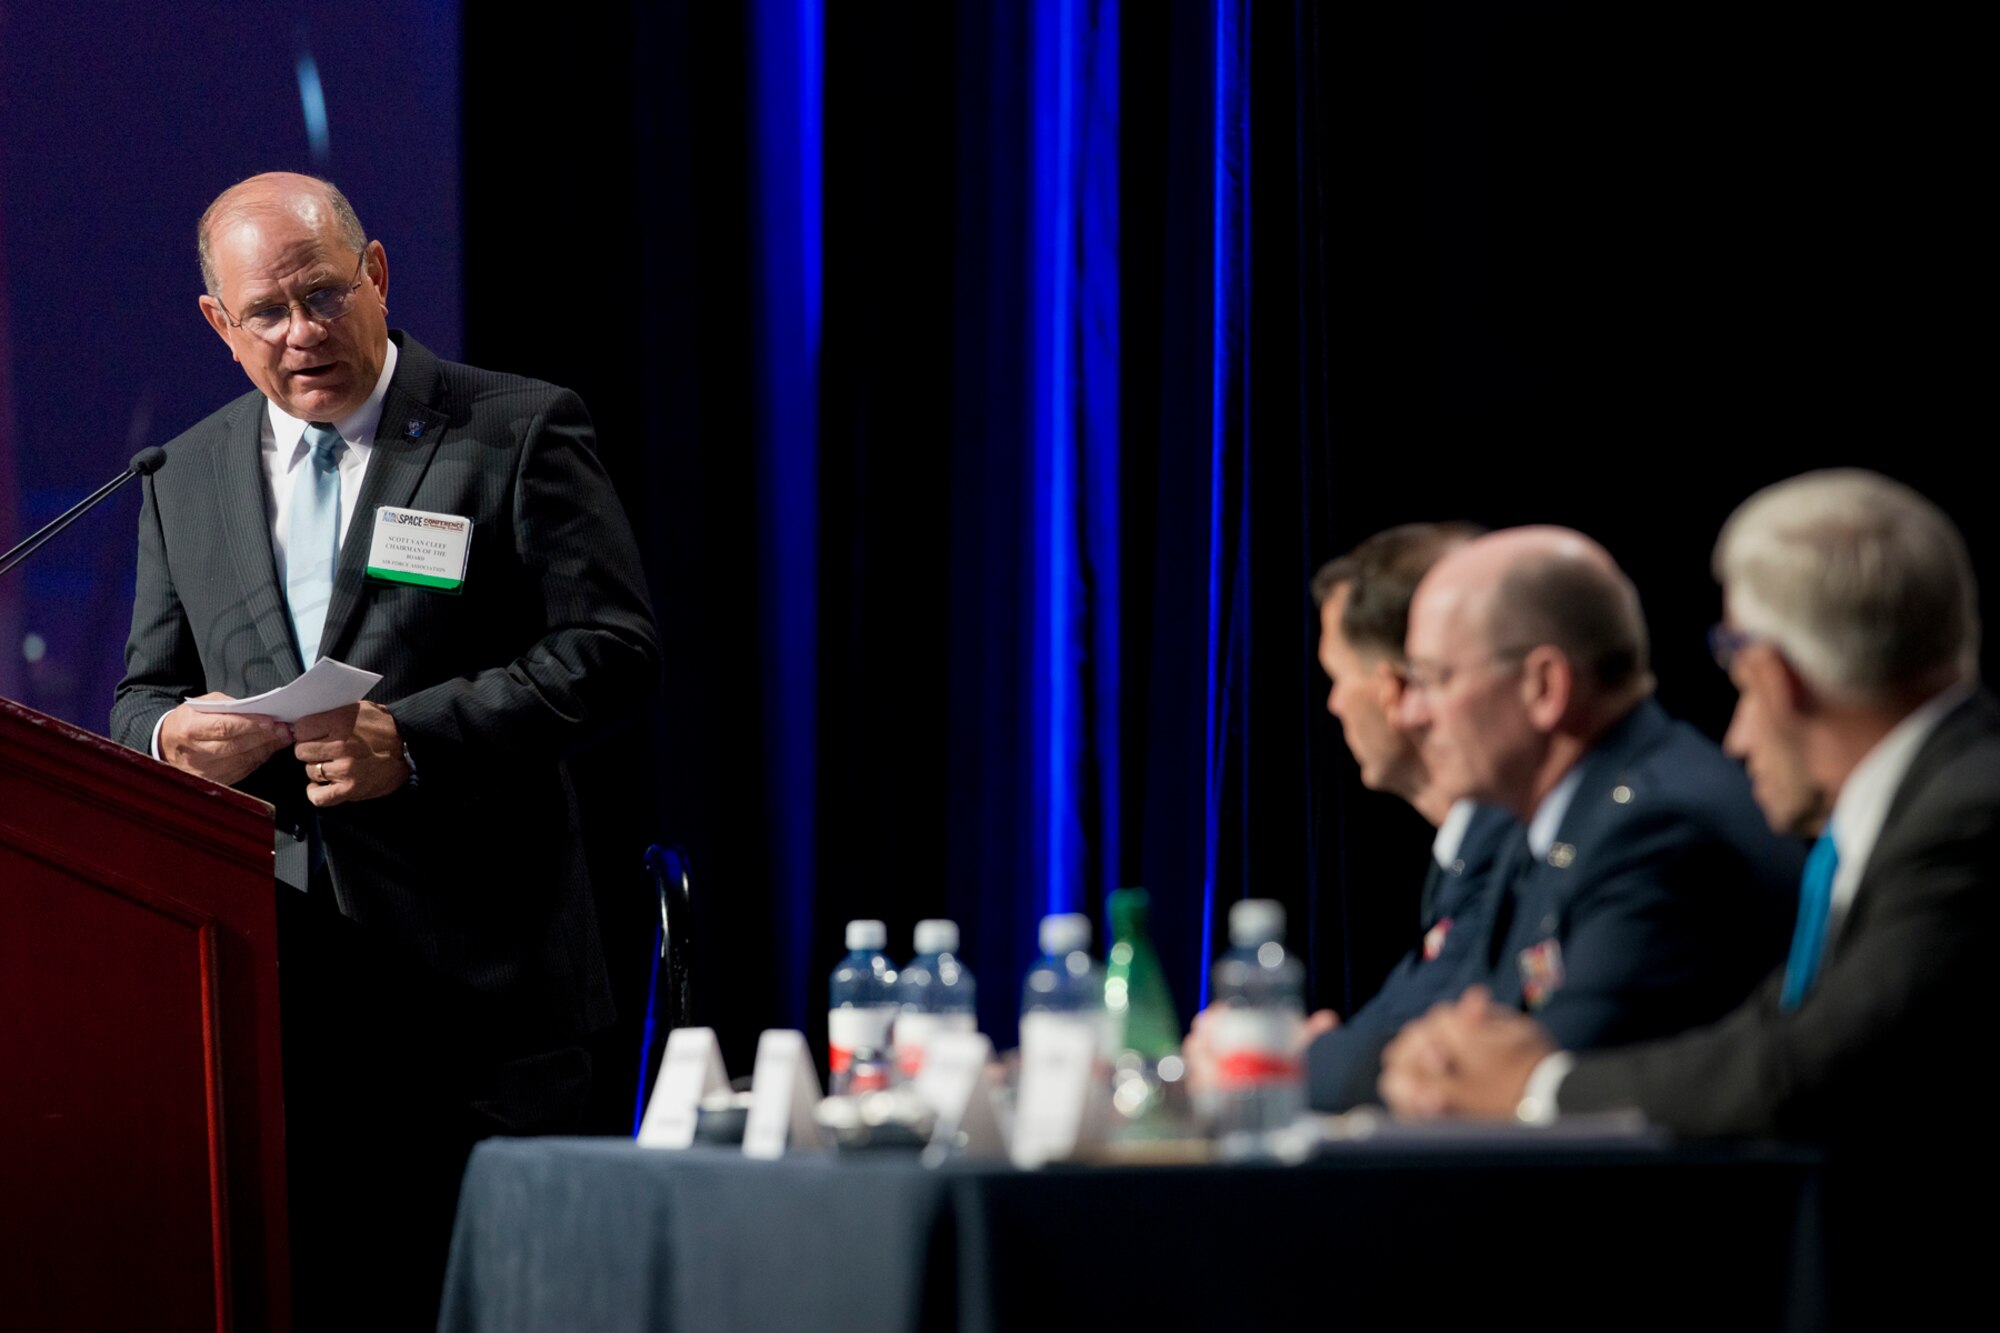 Scott Van Cleef, chairman of the board of the Air Force Association asks Lt. Gen. Stanley E. Clarke III, the director of the Air National Guard a question during the Total Force panel at the AFA's Air and Space Conference and Technology Exposition in National Harbor, Md., Sept. 16, 2015. The other members of the panel were Lt. Gen James Jackson, commander of the Air Force Reserve Command and chief of Air Force Reserves, Lt. Gen James Holmes, deputy chief of staff for Strategic Plans and Requirements and Daniel Sitterly, principal deputy Assistant Secretary of the Air Force for Manpower and Reserve Affairs. (U.S. Air National Guard photo/Master Sgt. Marvin R. Preston/Released)